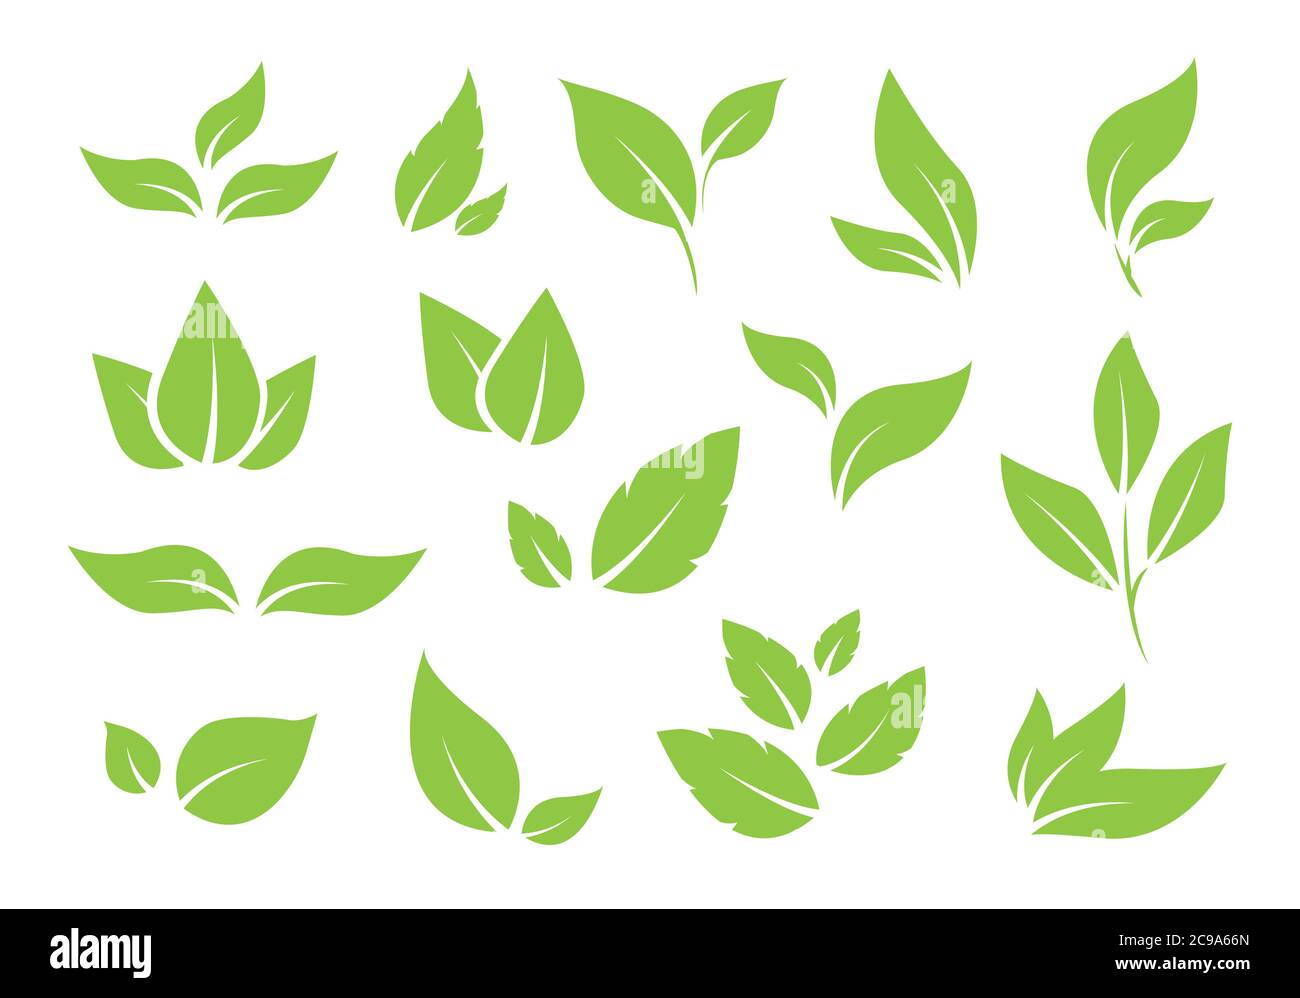 Green tree leaves. Various shapes of green leaves of trees and plants. Elements for eco and bio logos. Vector illustration. Stock Vector